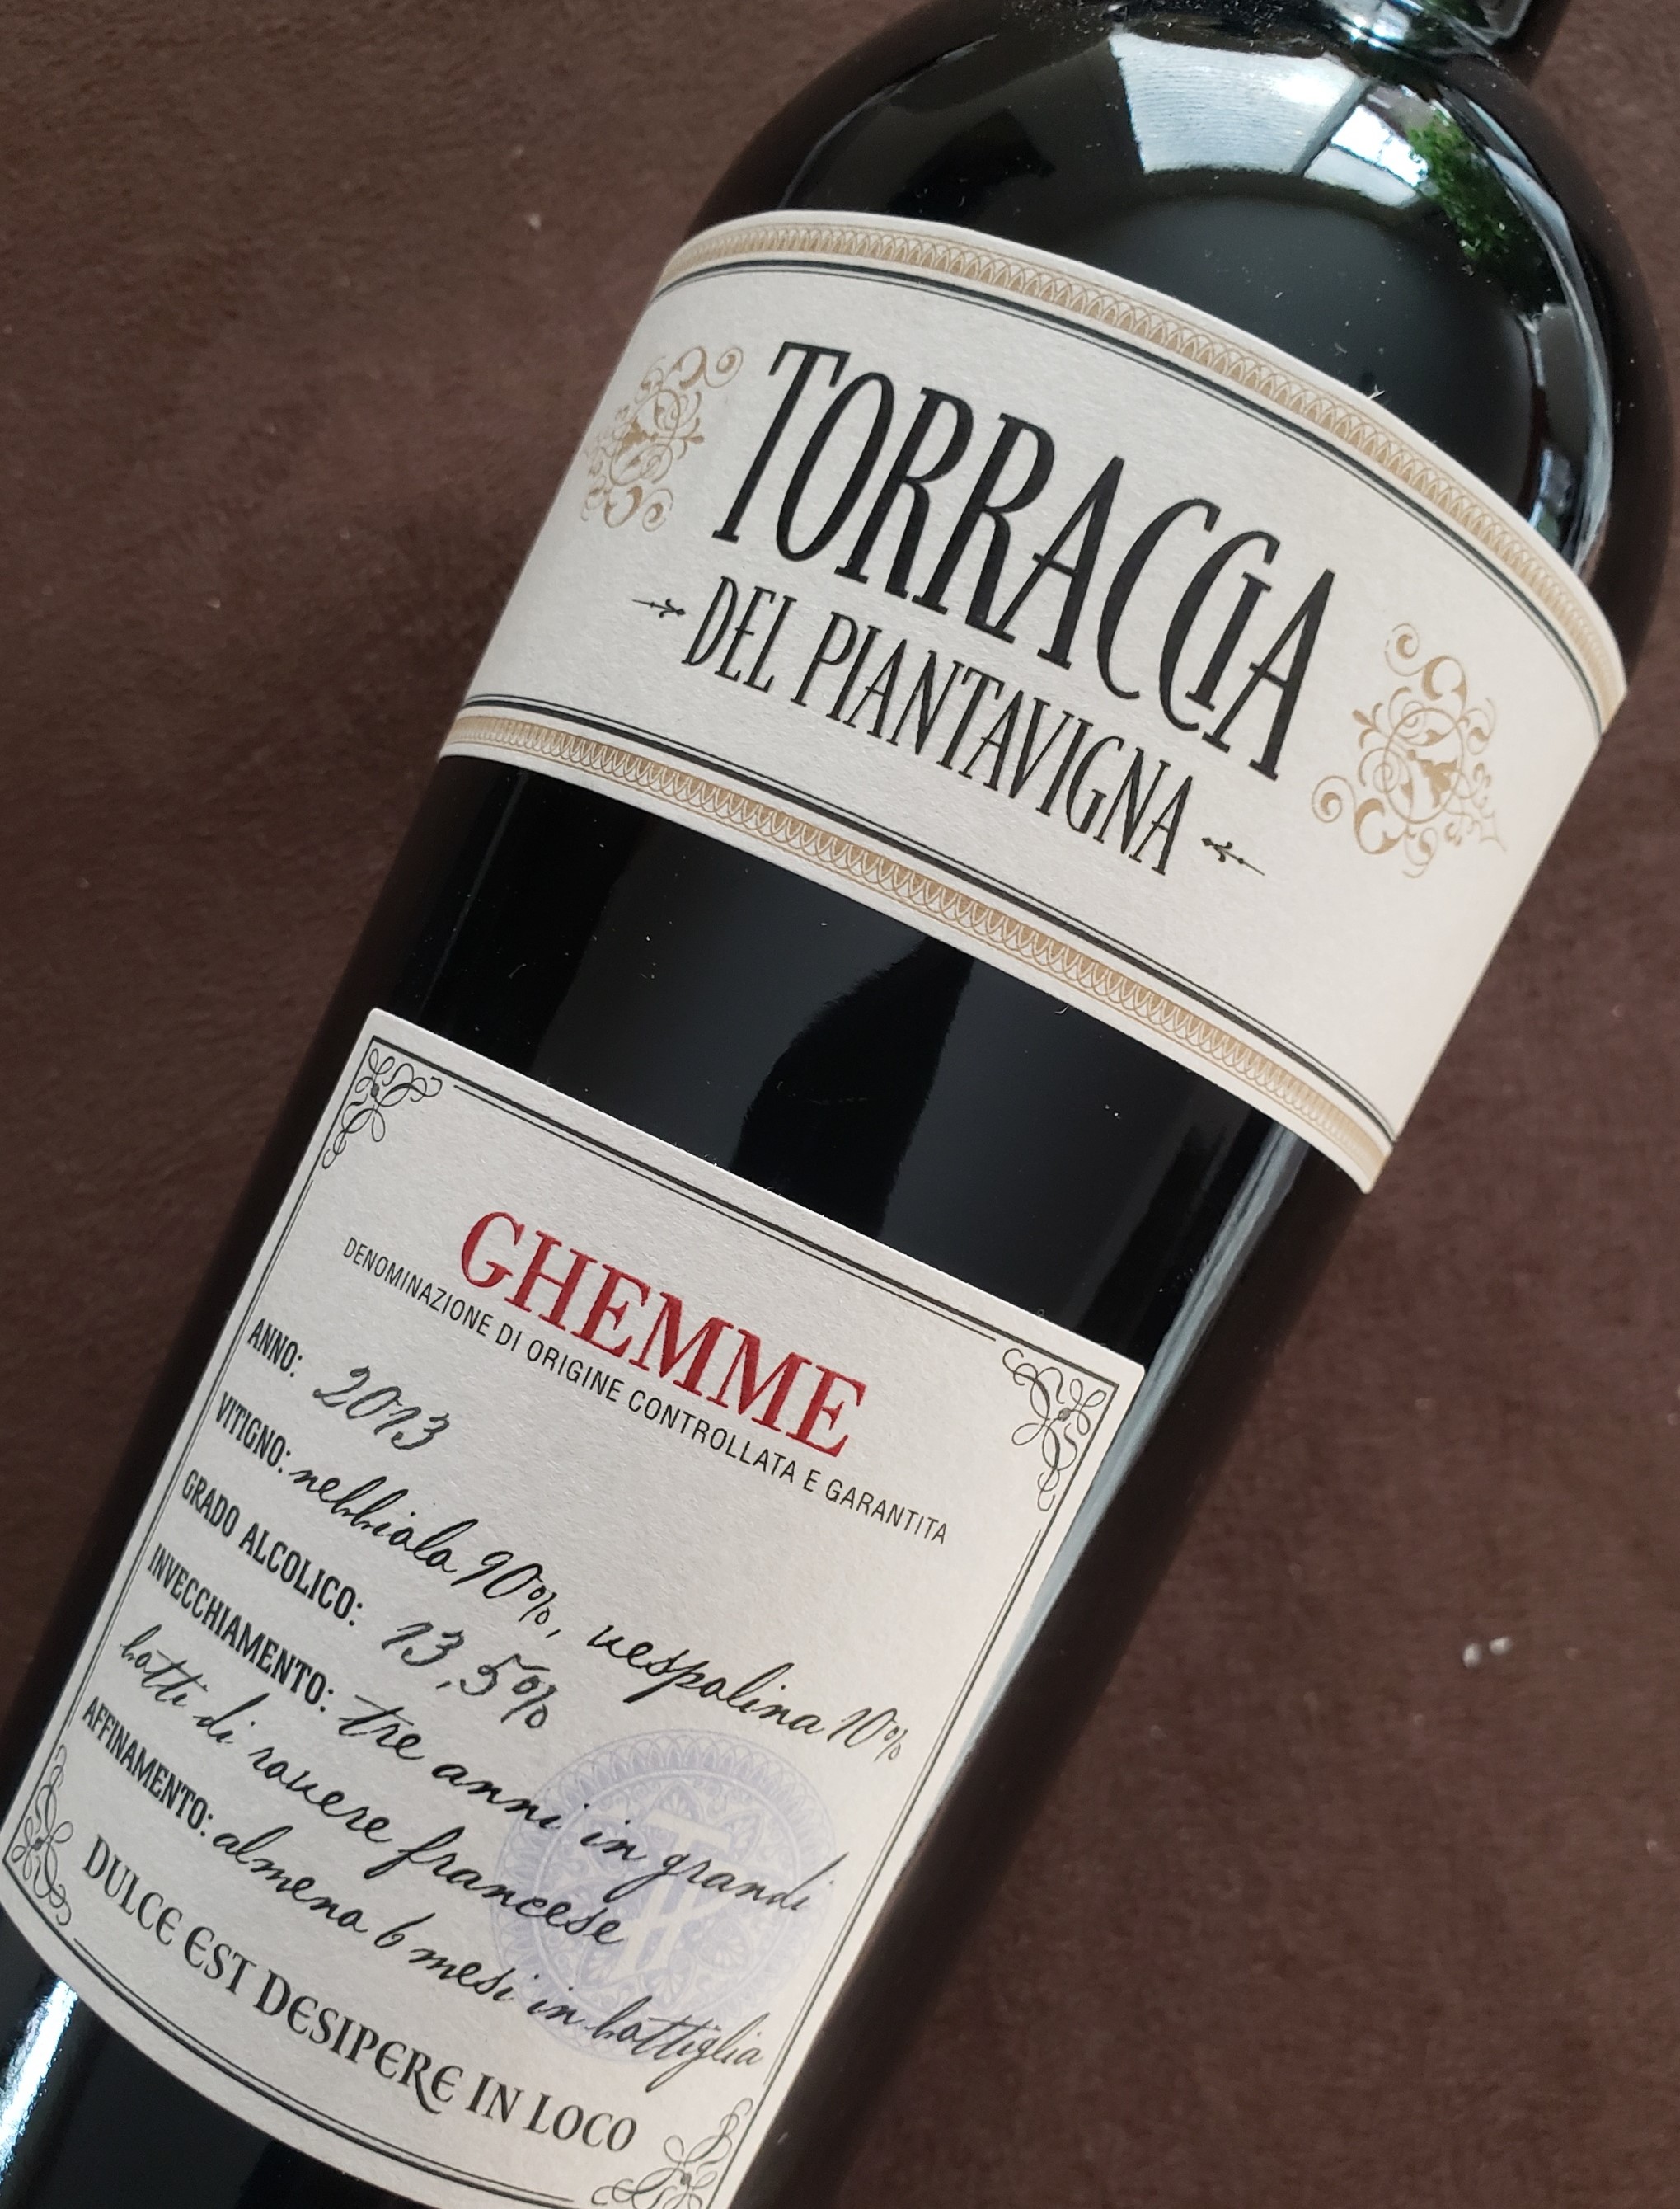 2013 Ghemme DOCG from the Torraccia del Pientavigna winery in the northern part of the Piedmont region.